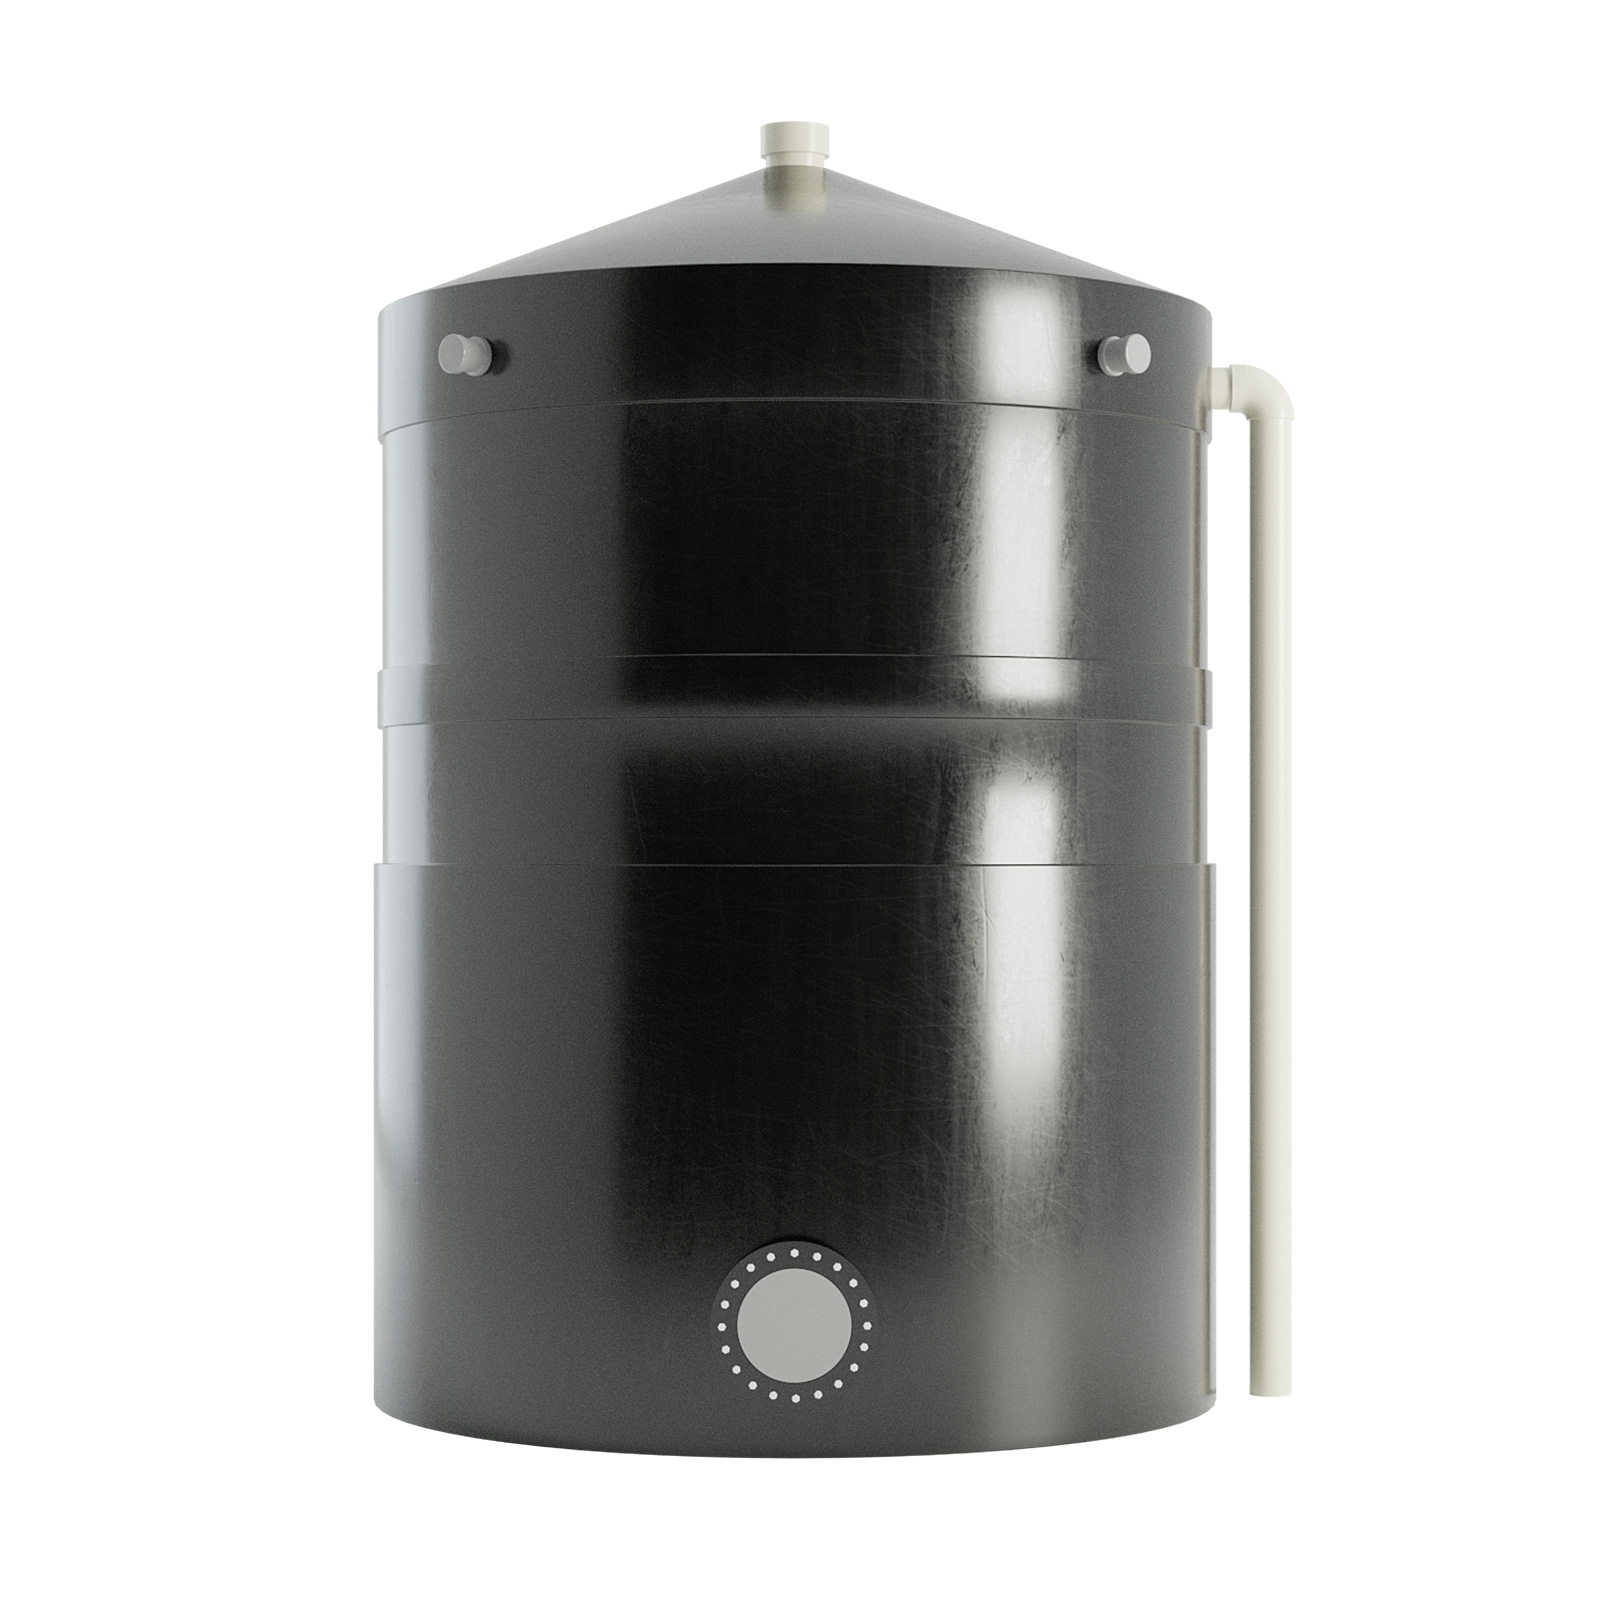 Black chemical storage tank with white pipe on right side